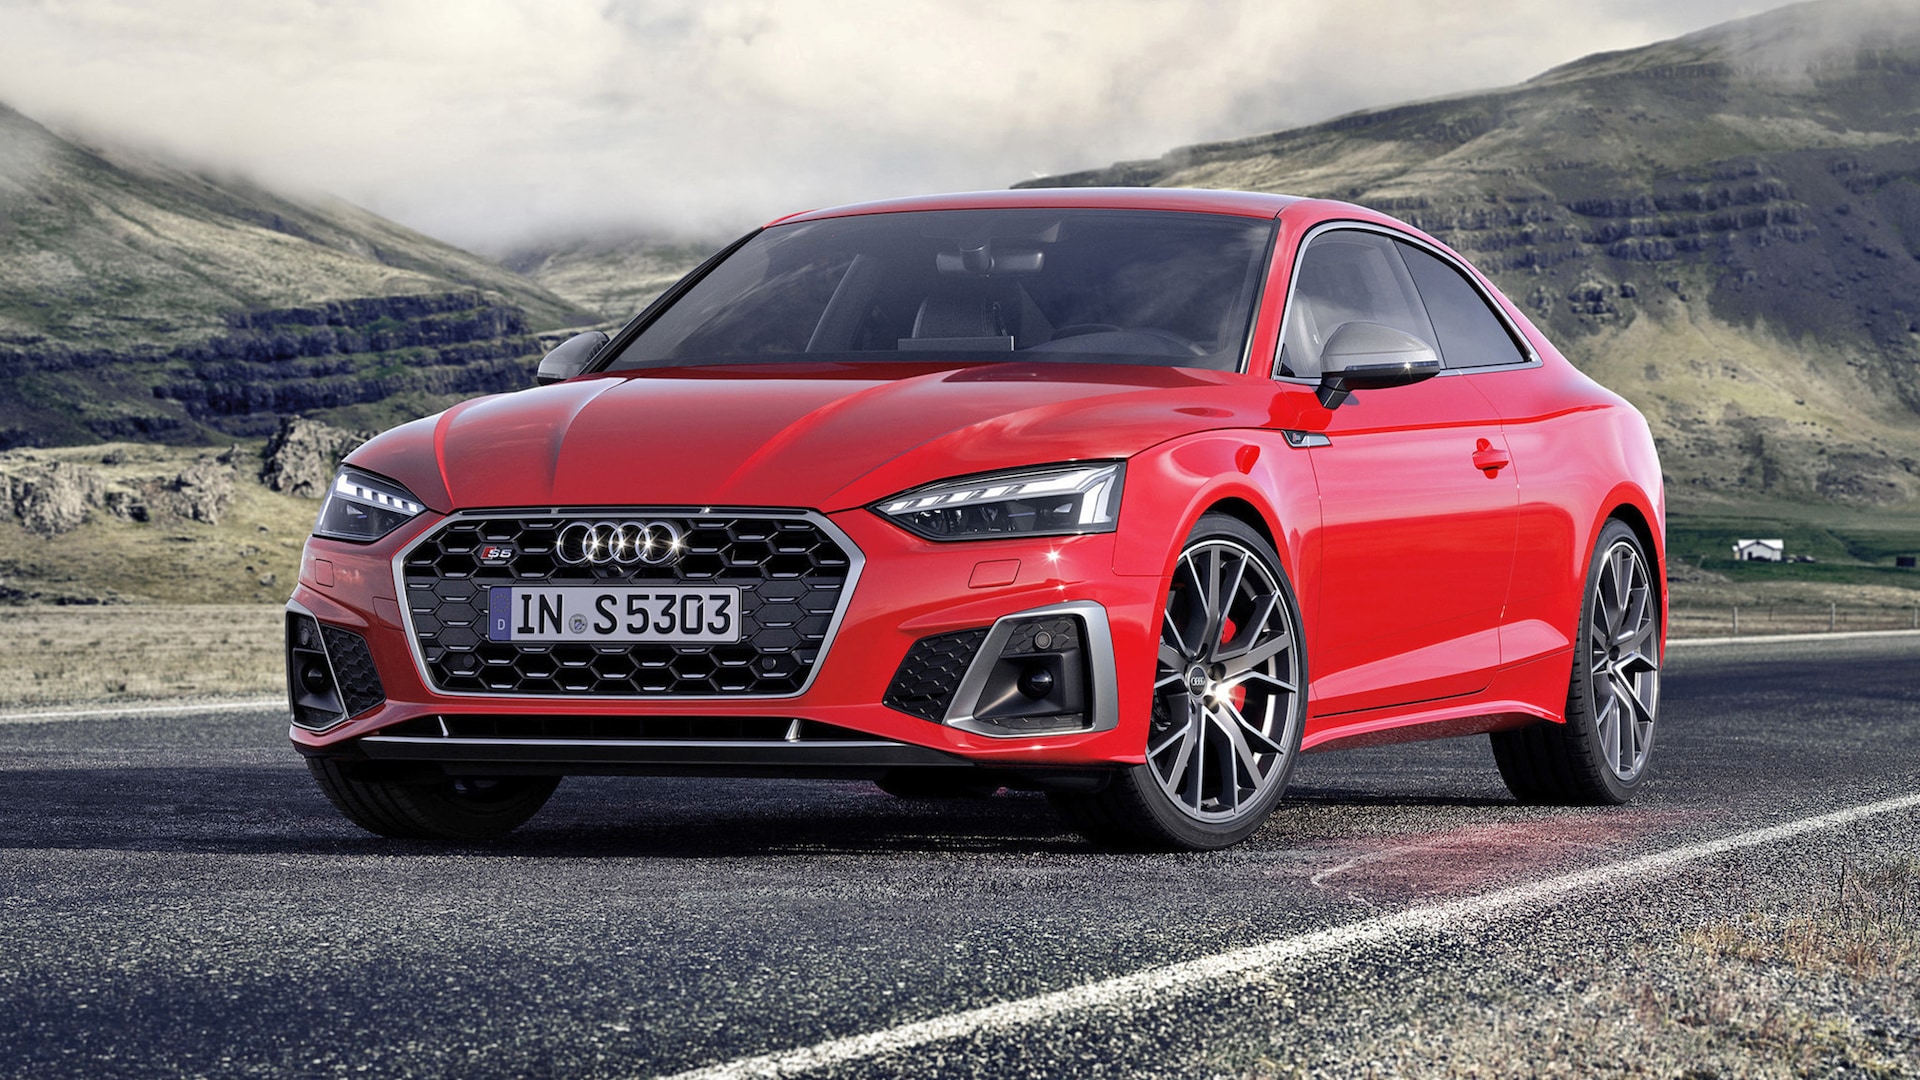 2023 Audi S5 Prices, Reviews, and Photos - MotorTrend